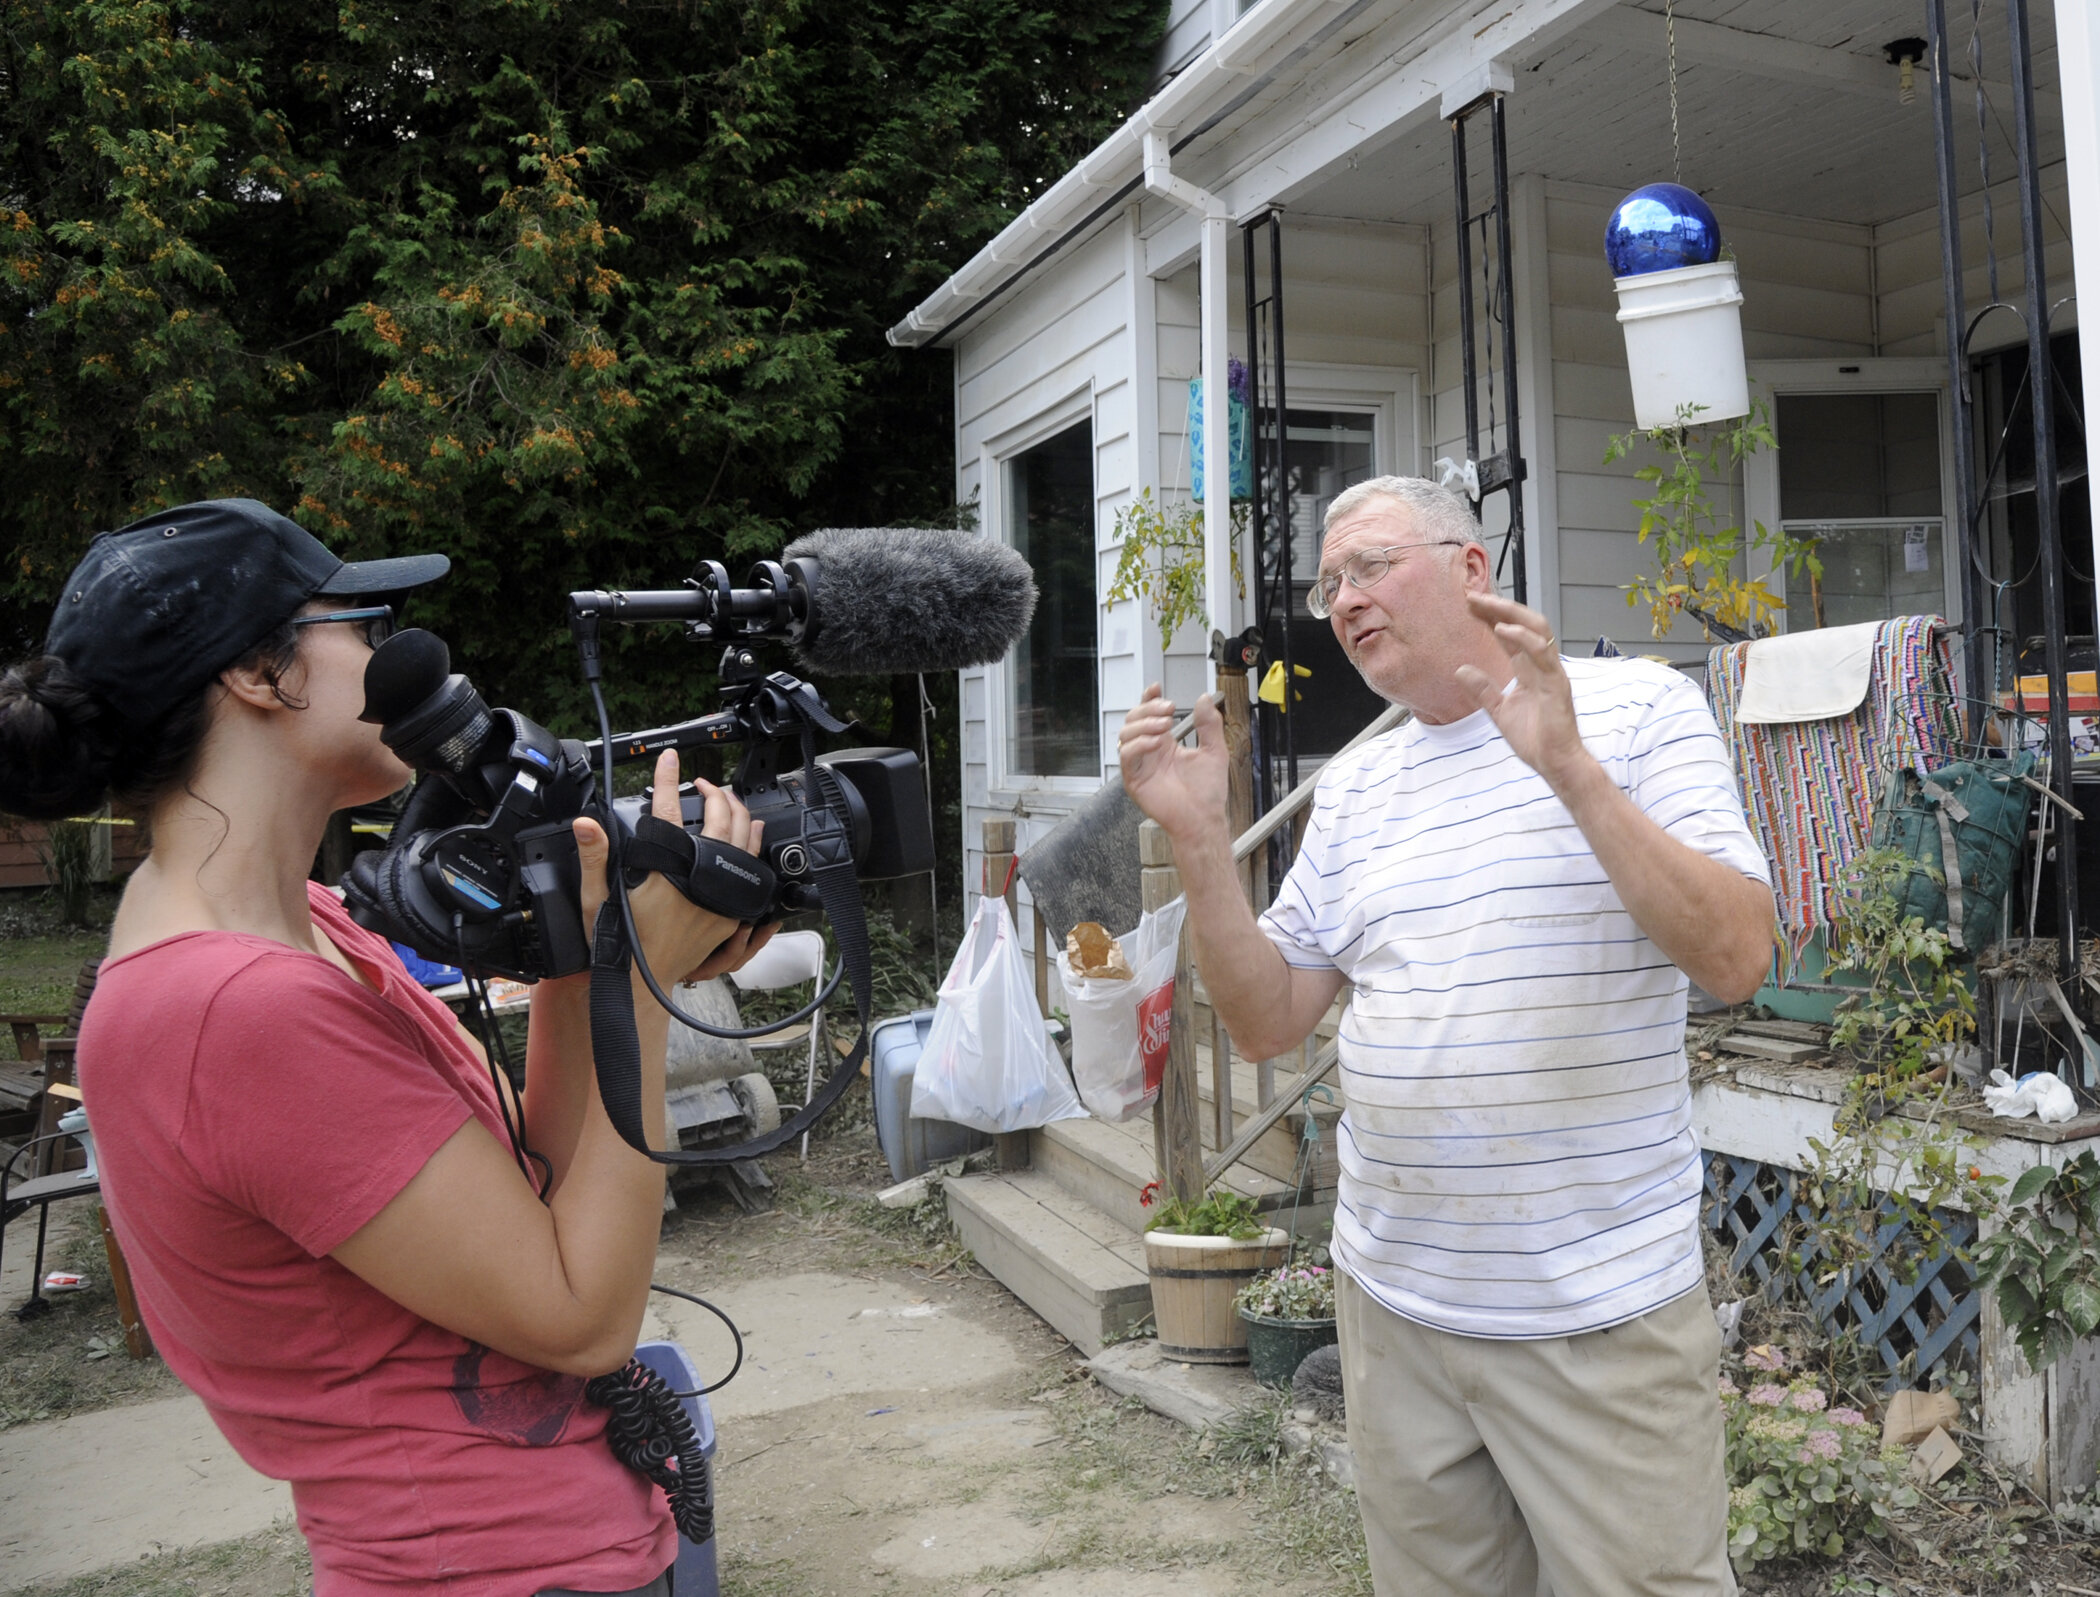  Village trustee and Elm Street resident Skip Flanders gives an interview. Photo by Gordon Miller 